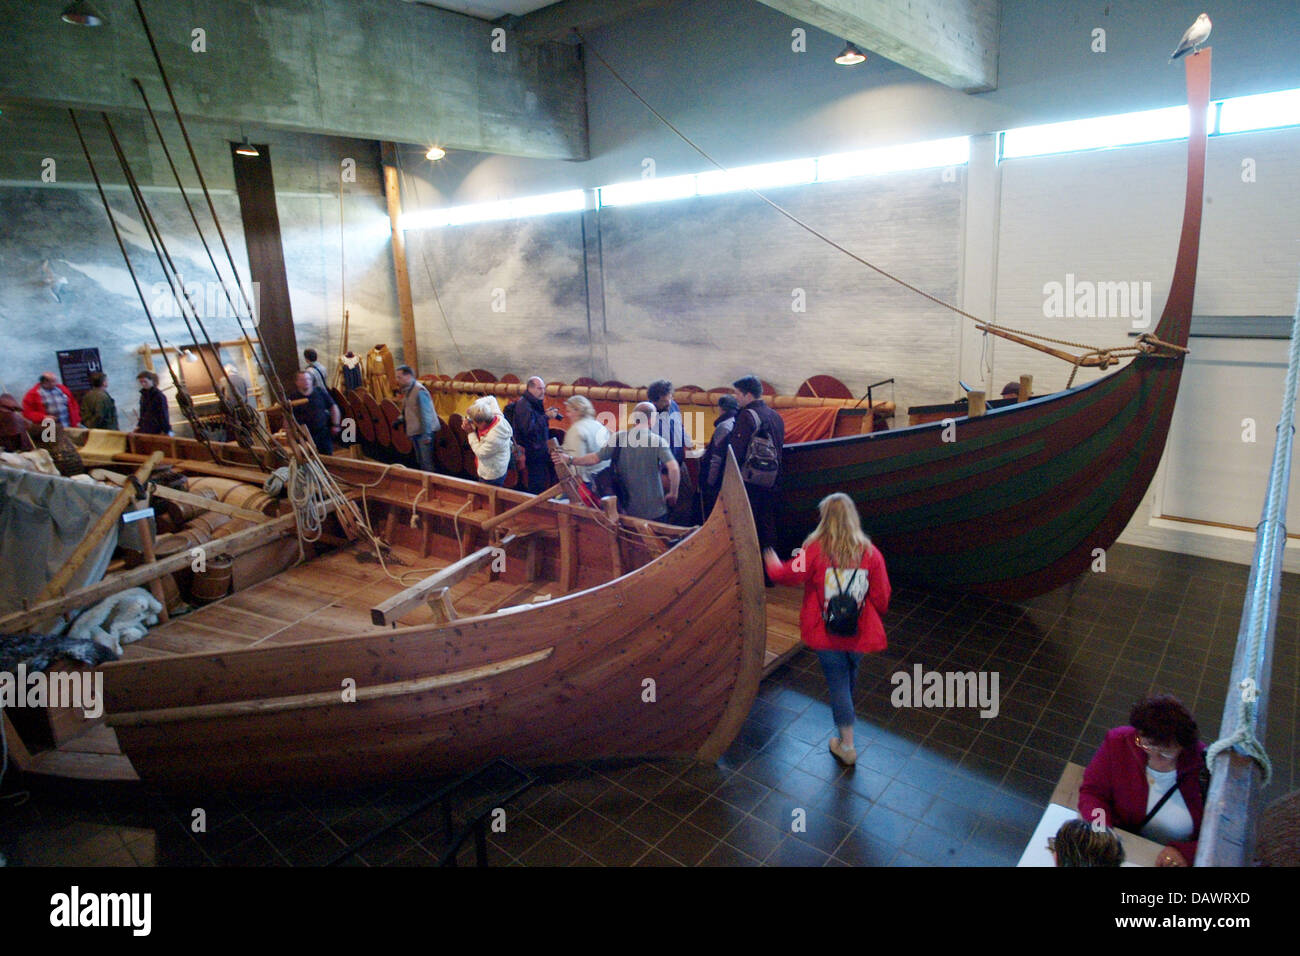 Visitors take a look at reconstructed Viking ships from the 11th century, discoverd in the Roskilde fjord in 1962, in the ship hall of the museum for Viking ships in Roskilde, Denmark, 22 May 2007. Shipbuilding and seafaring of the Vikings are presented in the museum that has its own wharf and an archaeological workshop and offers Viking ship boat trips in the summer. Photo: Mauriz Stock Photo